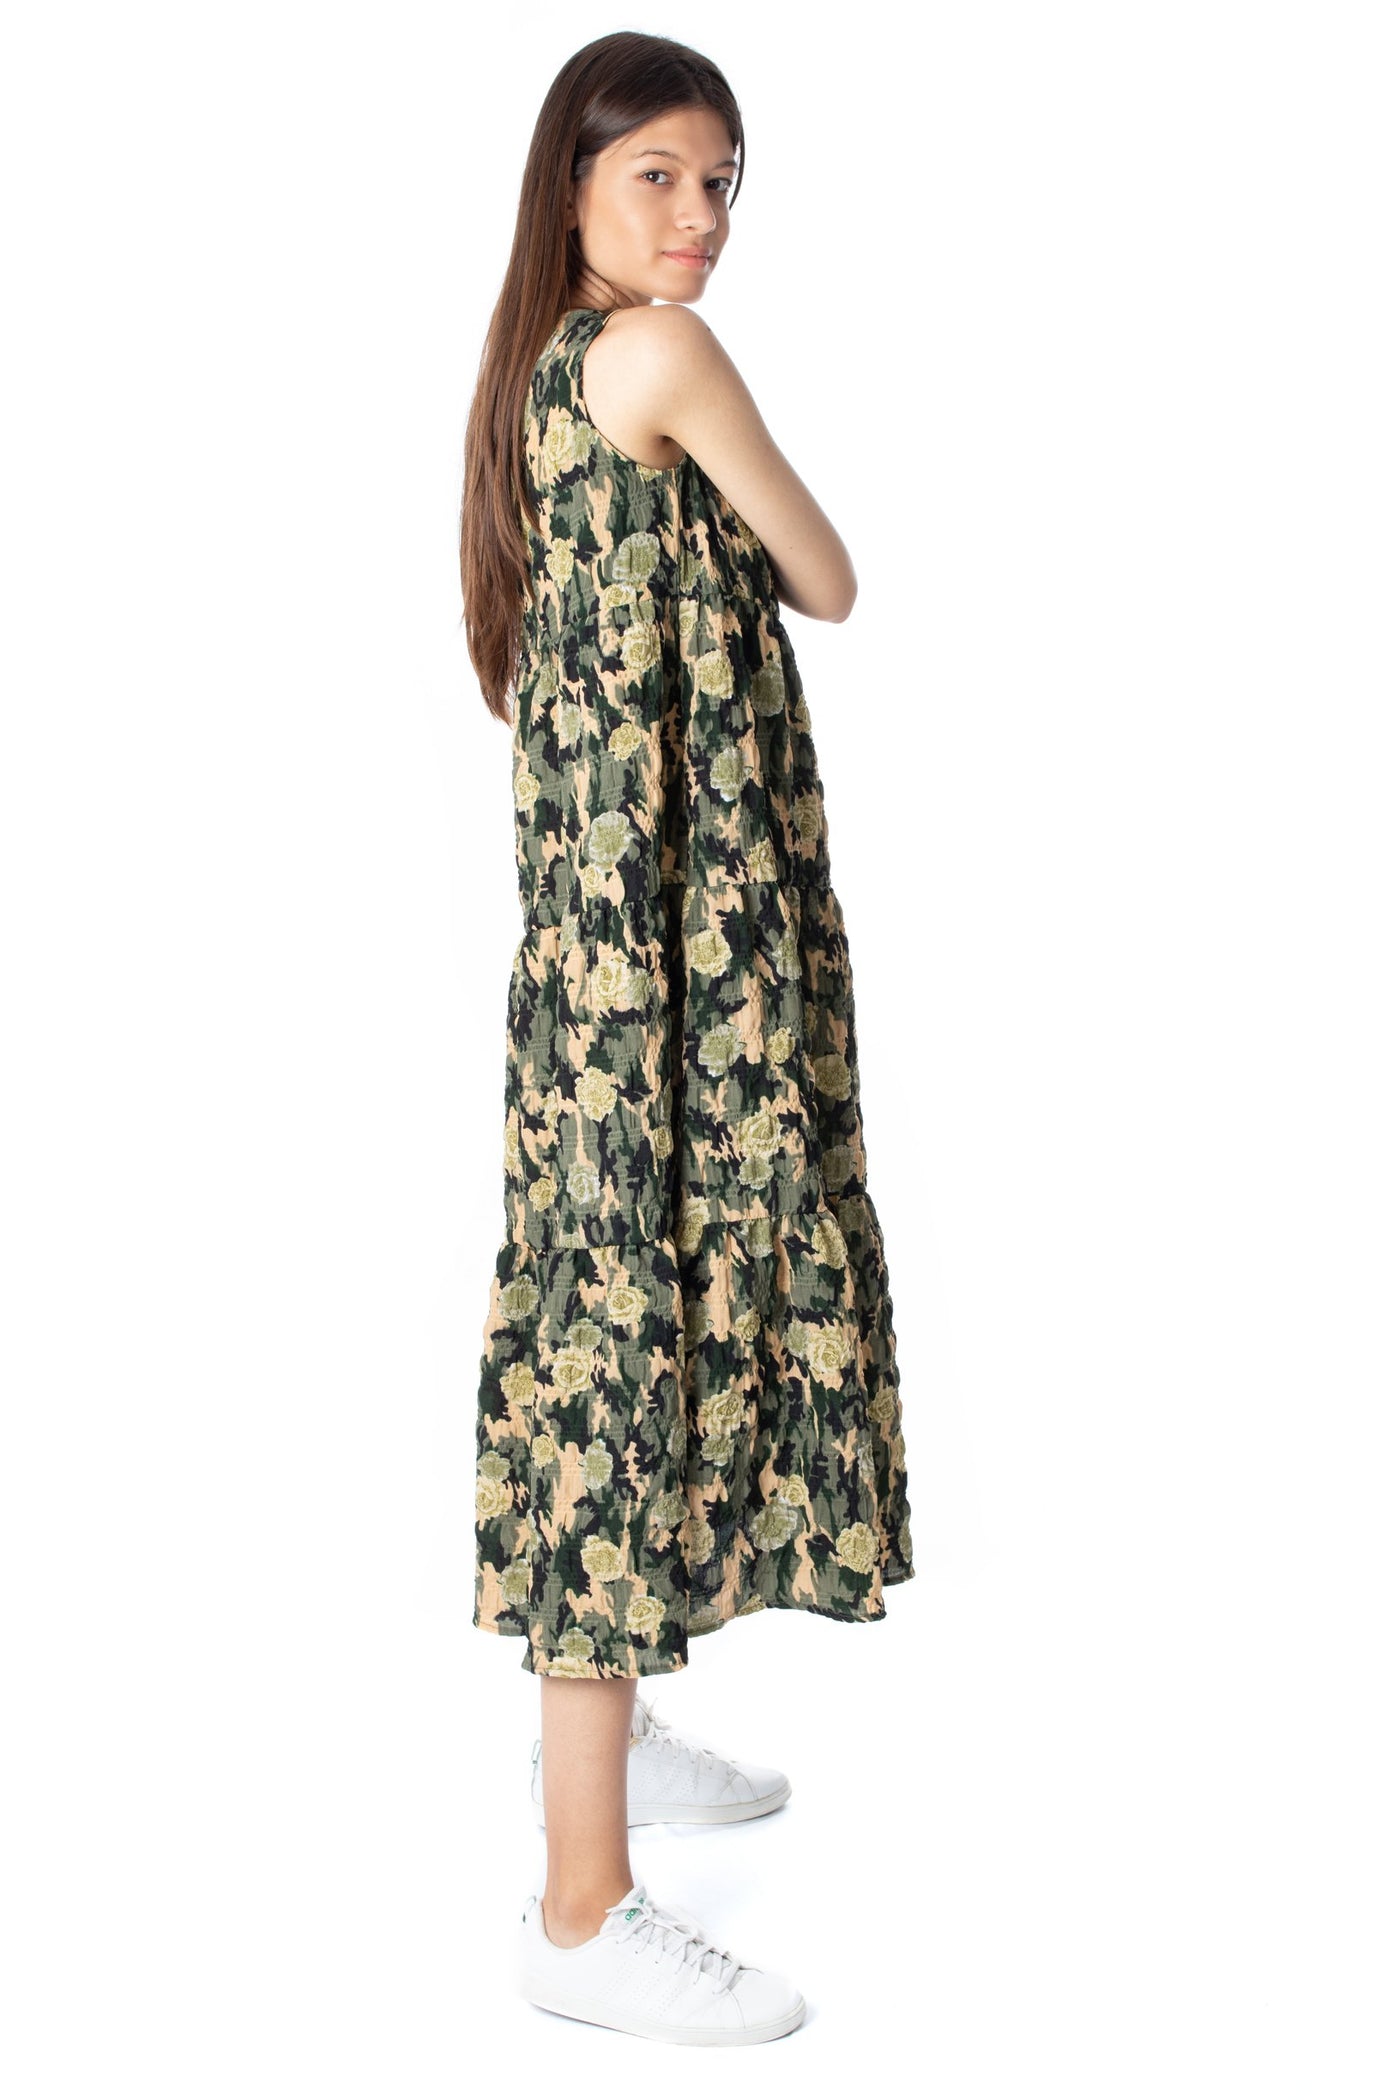 chassca floral printed shirred tiered design maxy dress - Breakmood